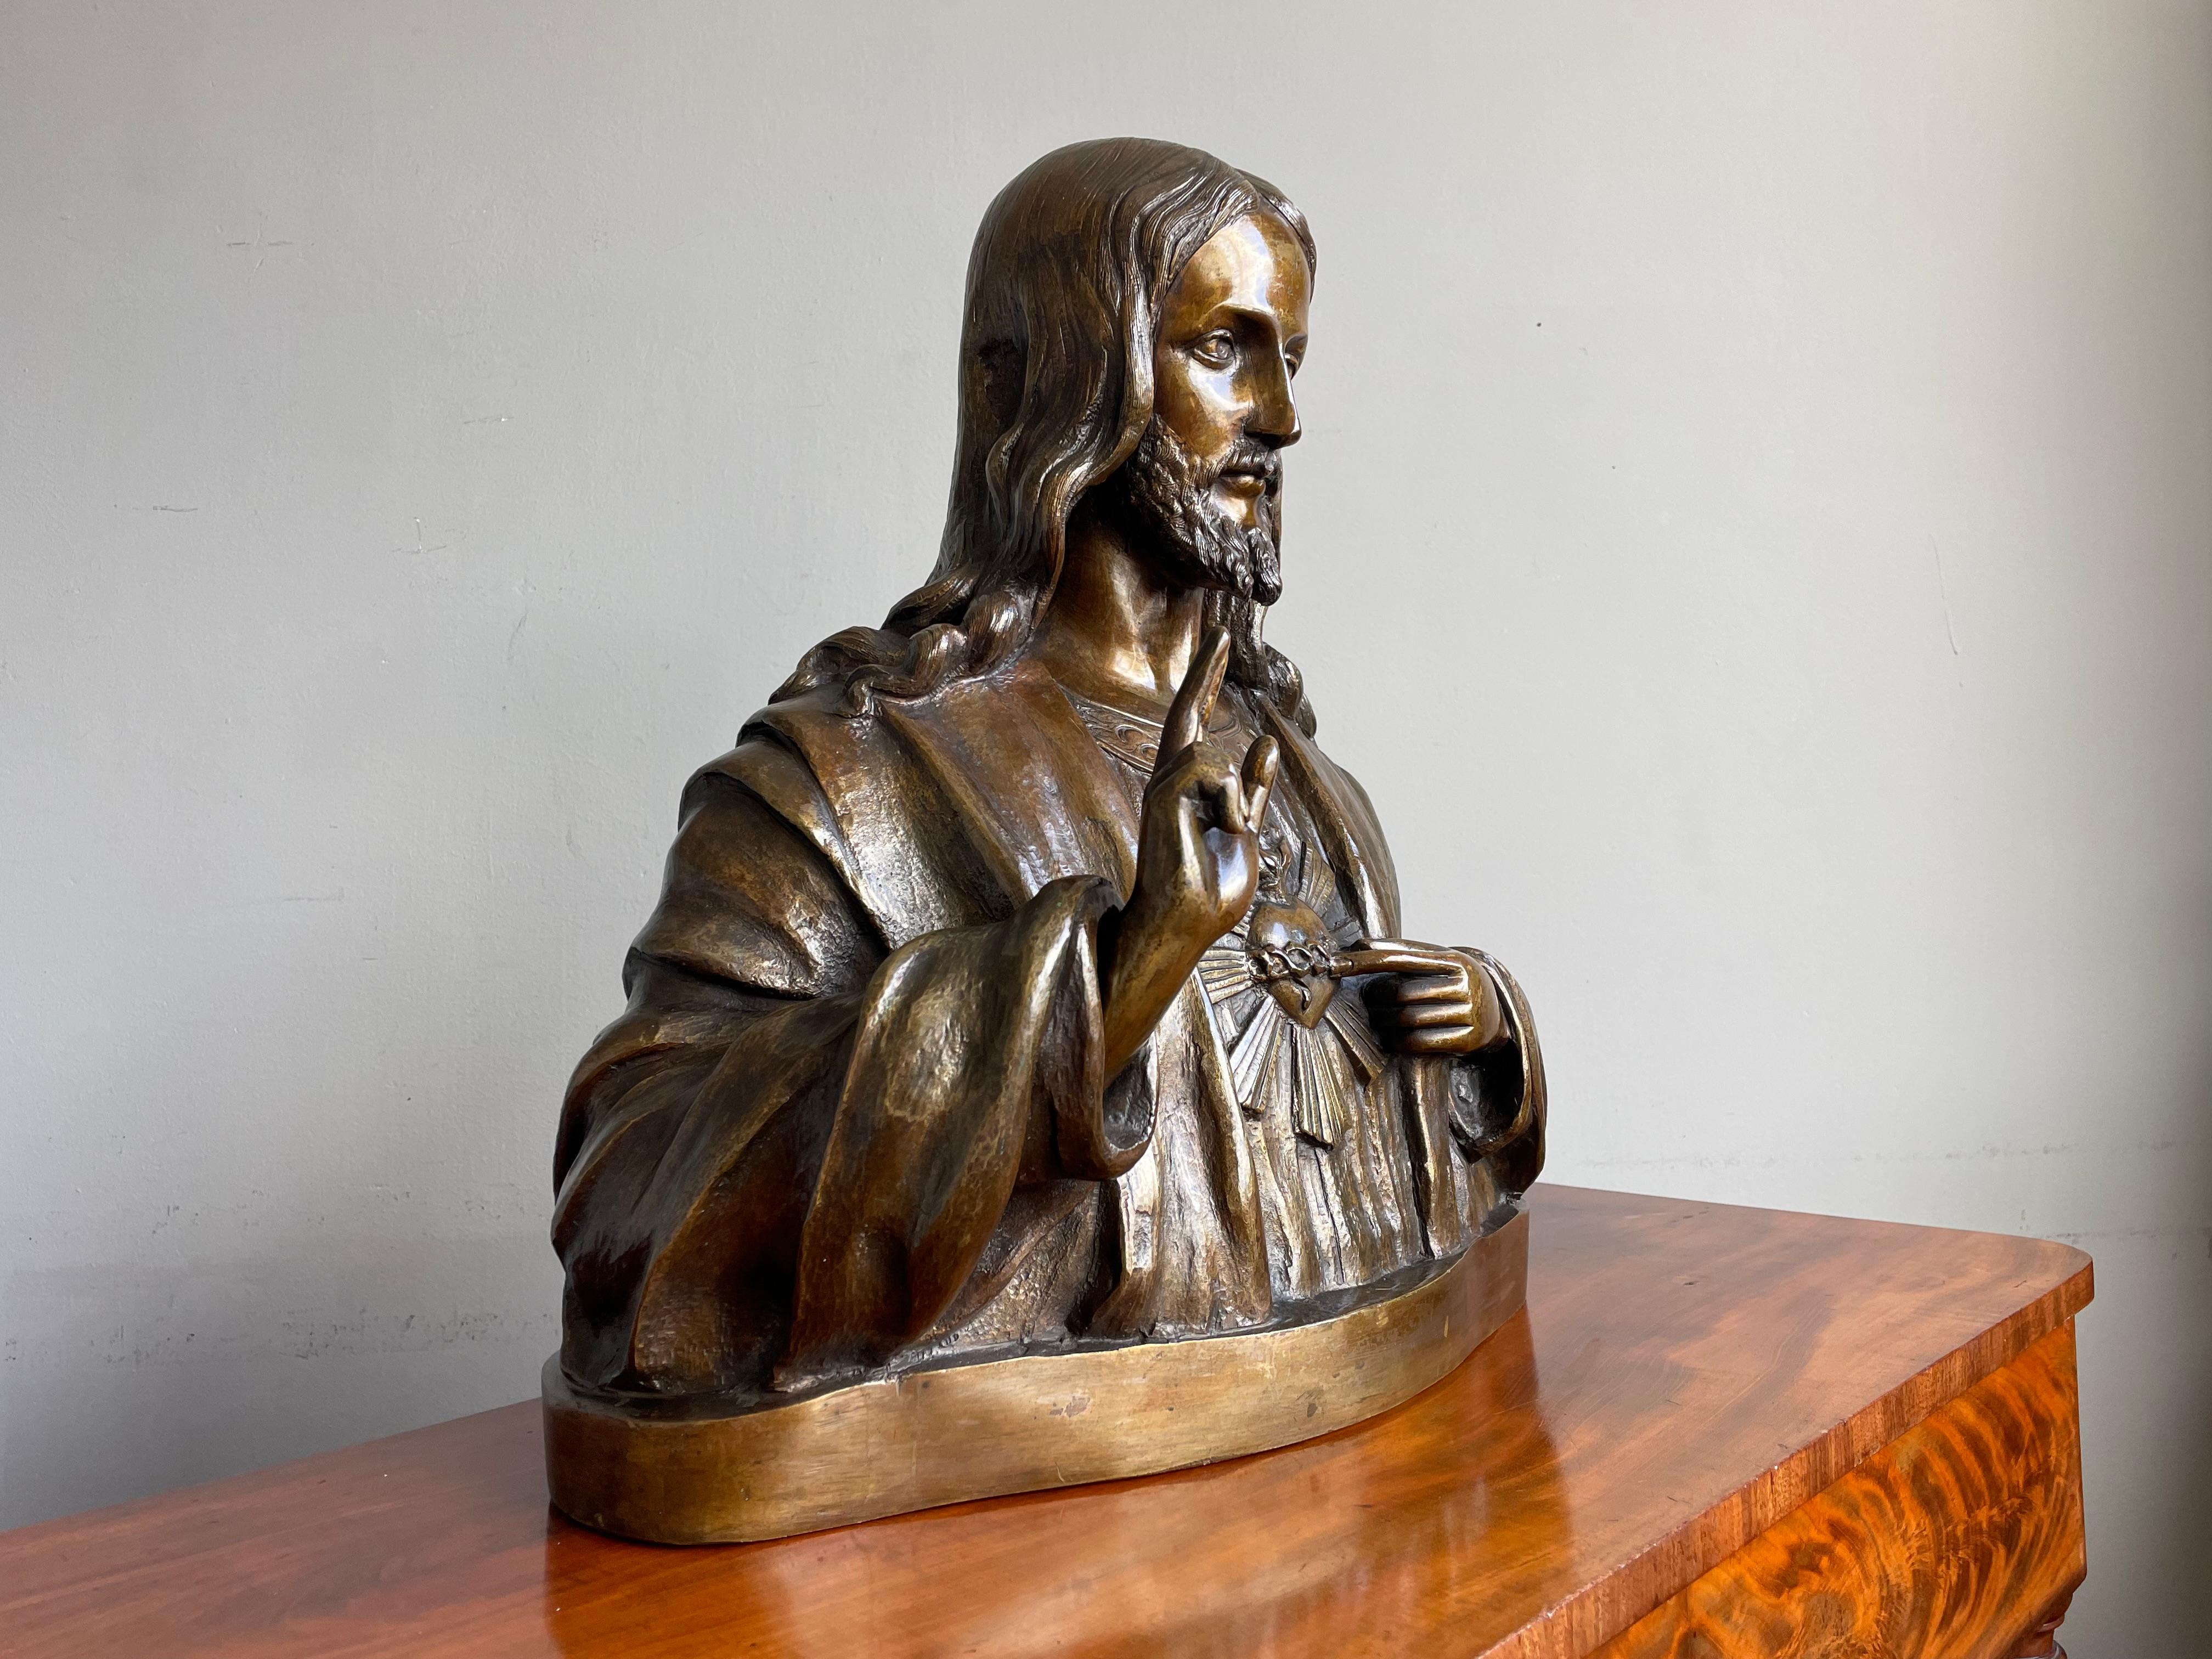 20th Century Rare Antique Bronze Holy Heart Sculpture / Bust of Our Lord Jesus Christ 1920 For Sale